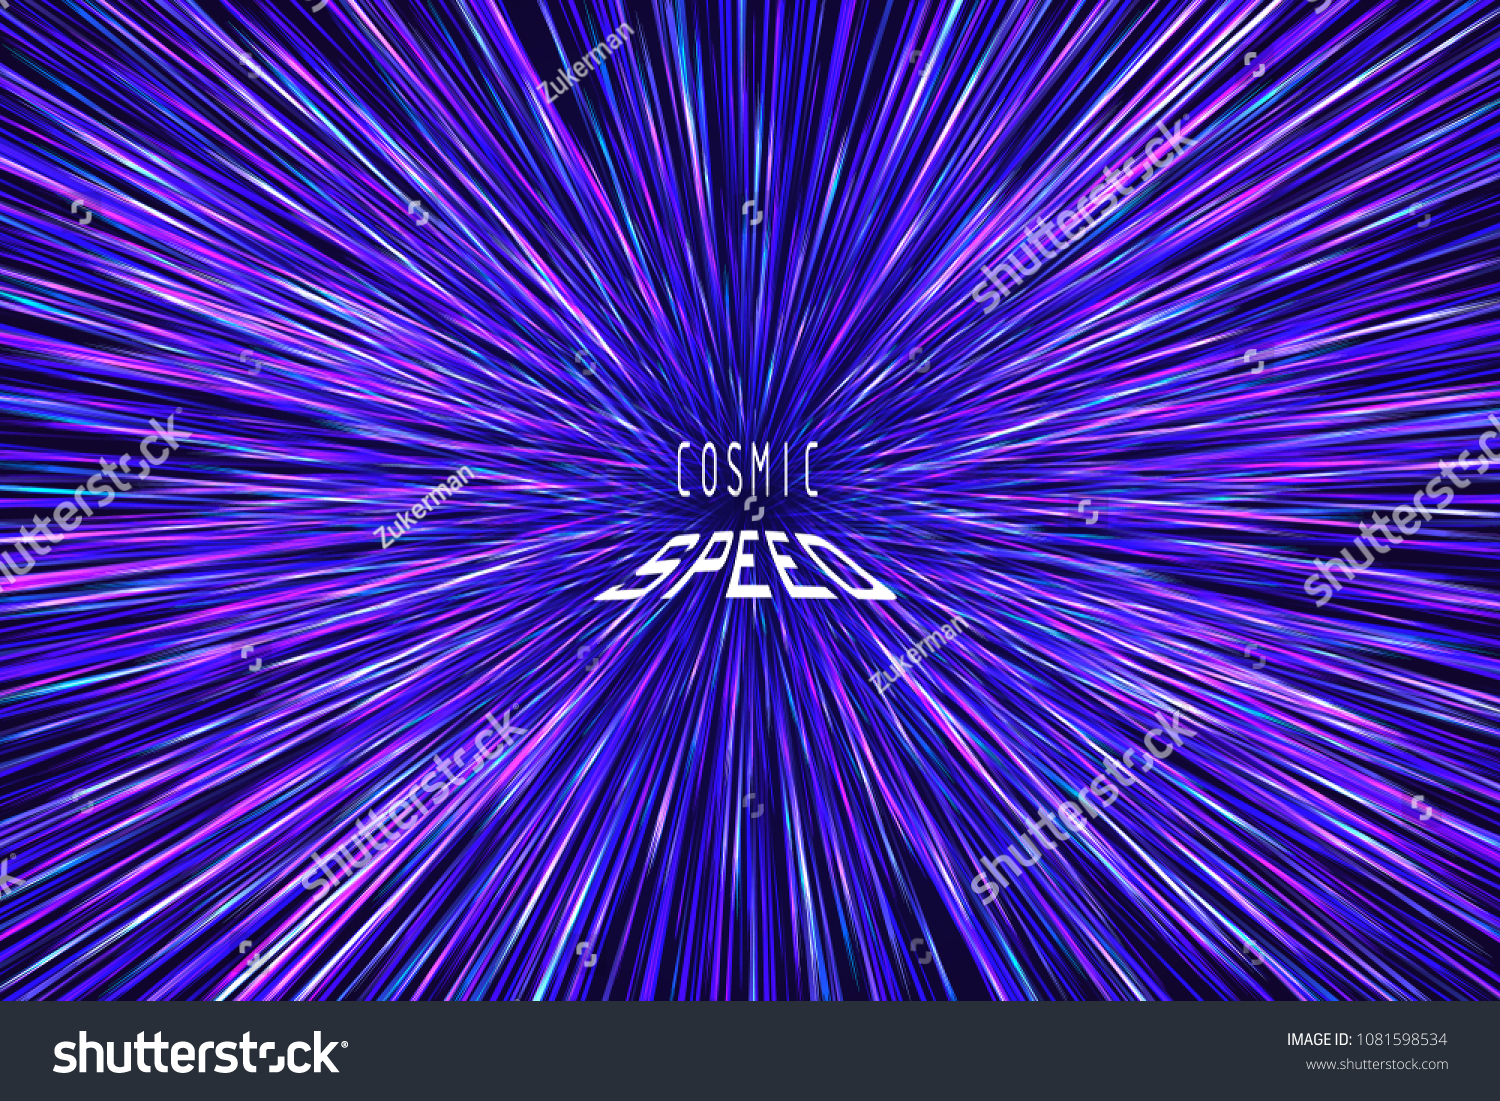 Light Rays Neon Radial Lines Background Stock Vector Royalty